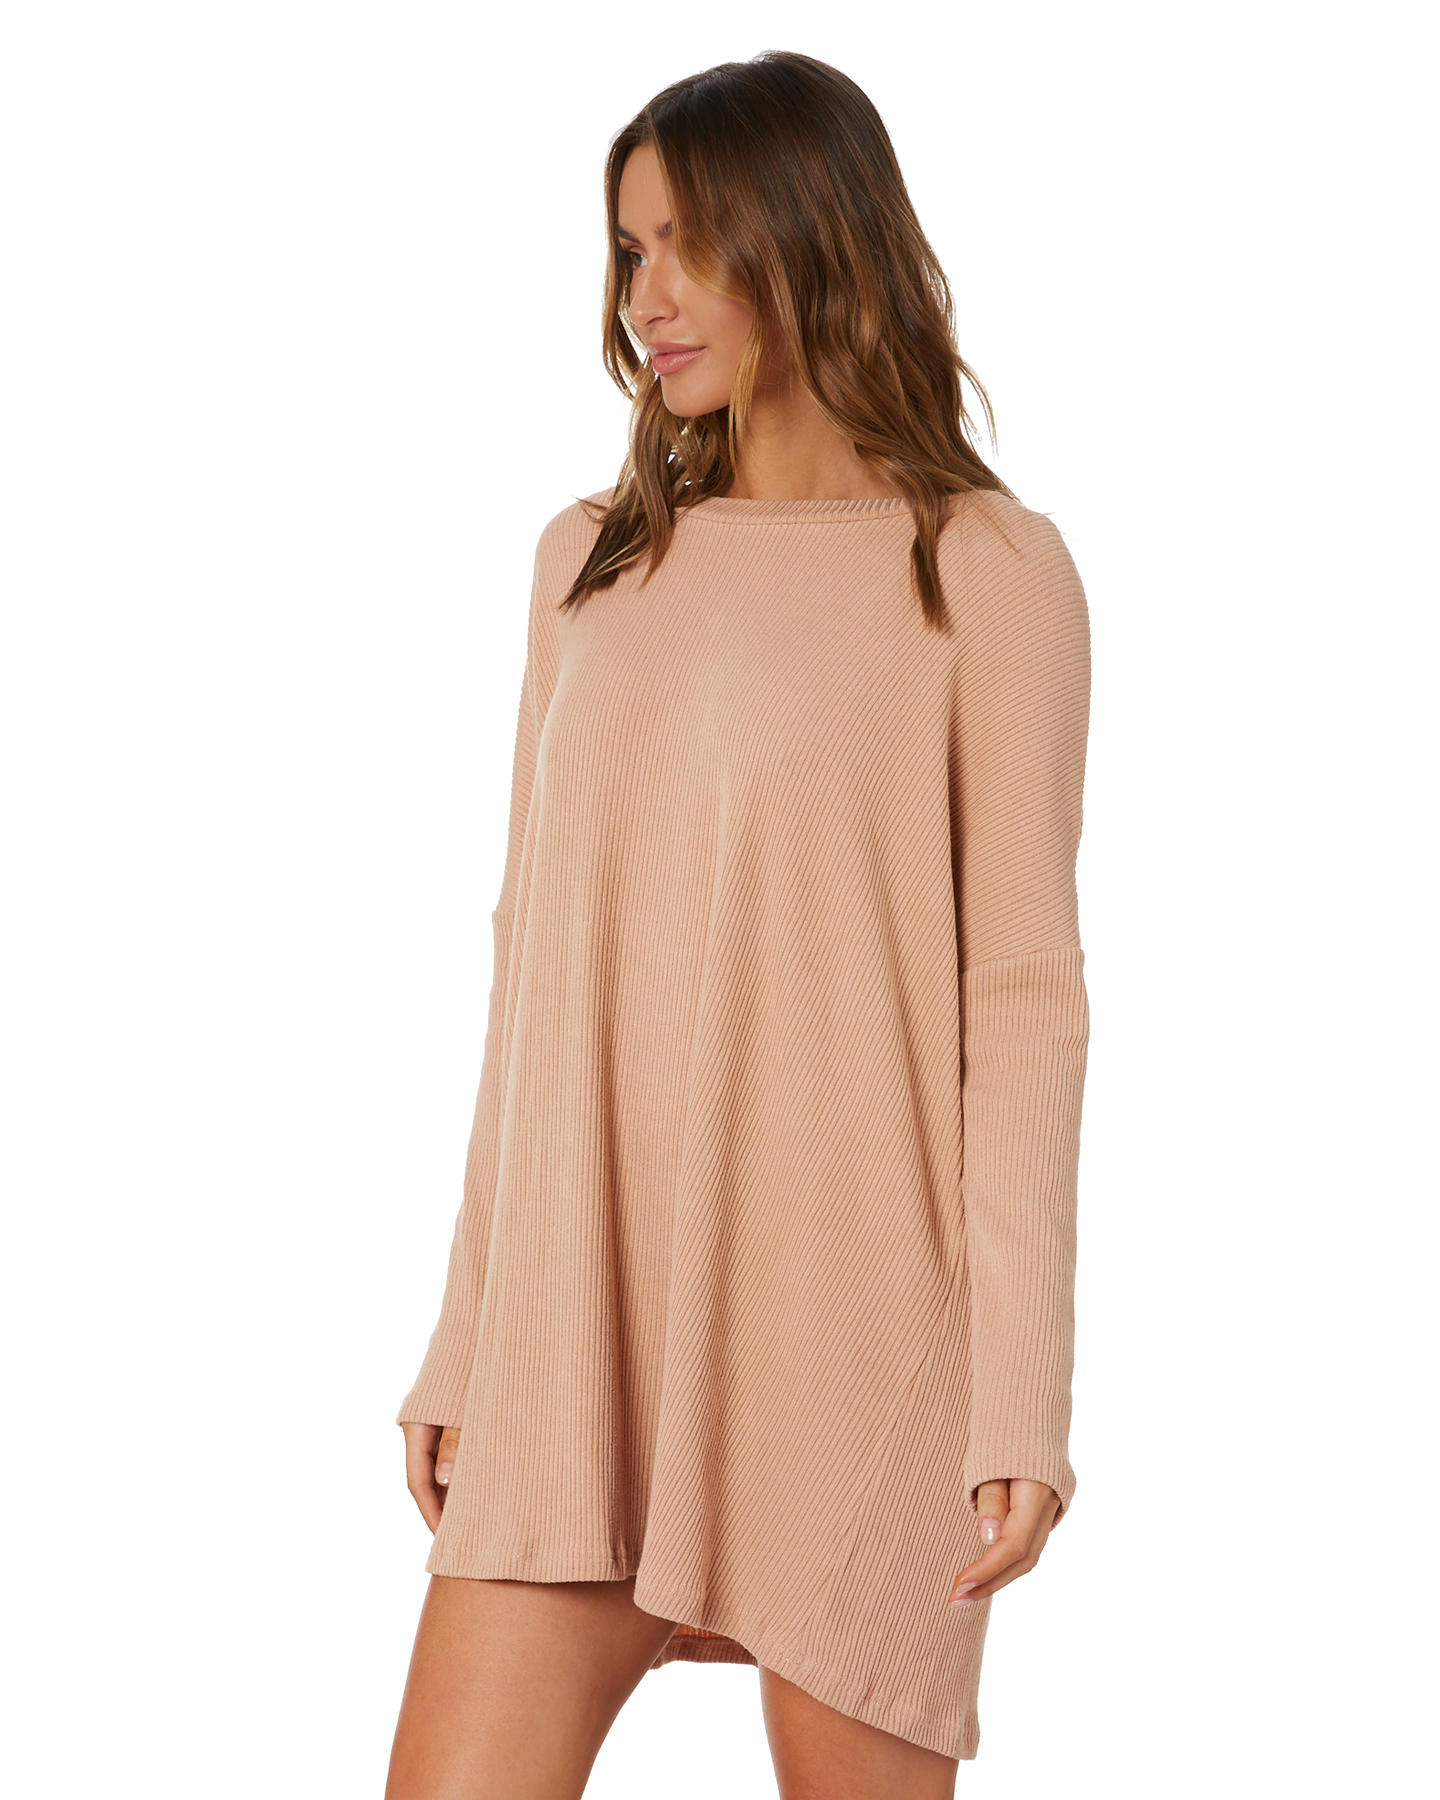 Toby Heart Ginger Lucy Tee Ribbed Dress - Tan | SurfStitch